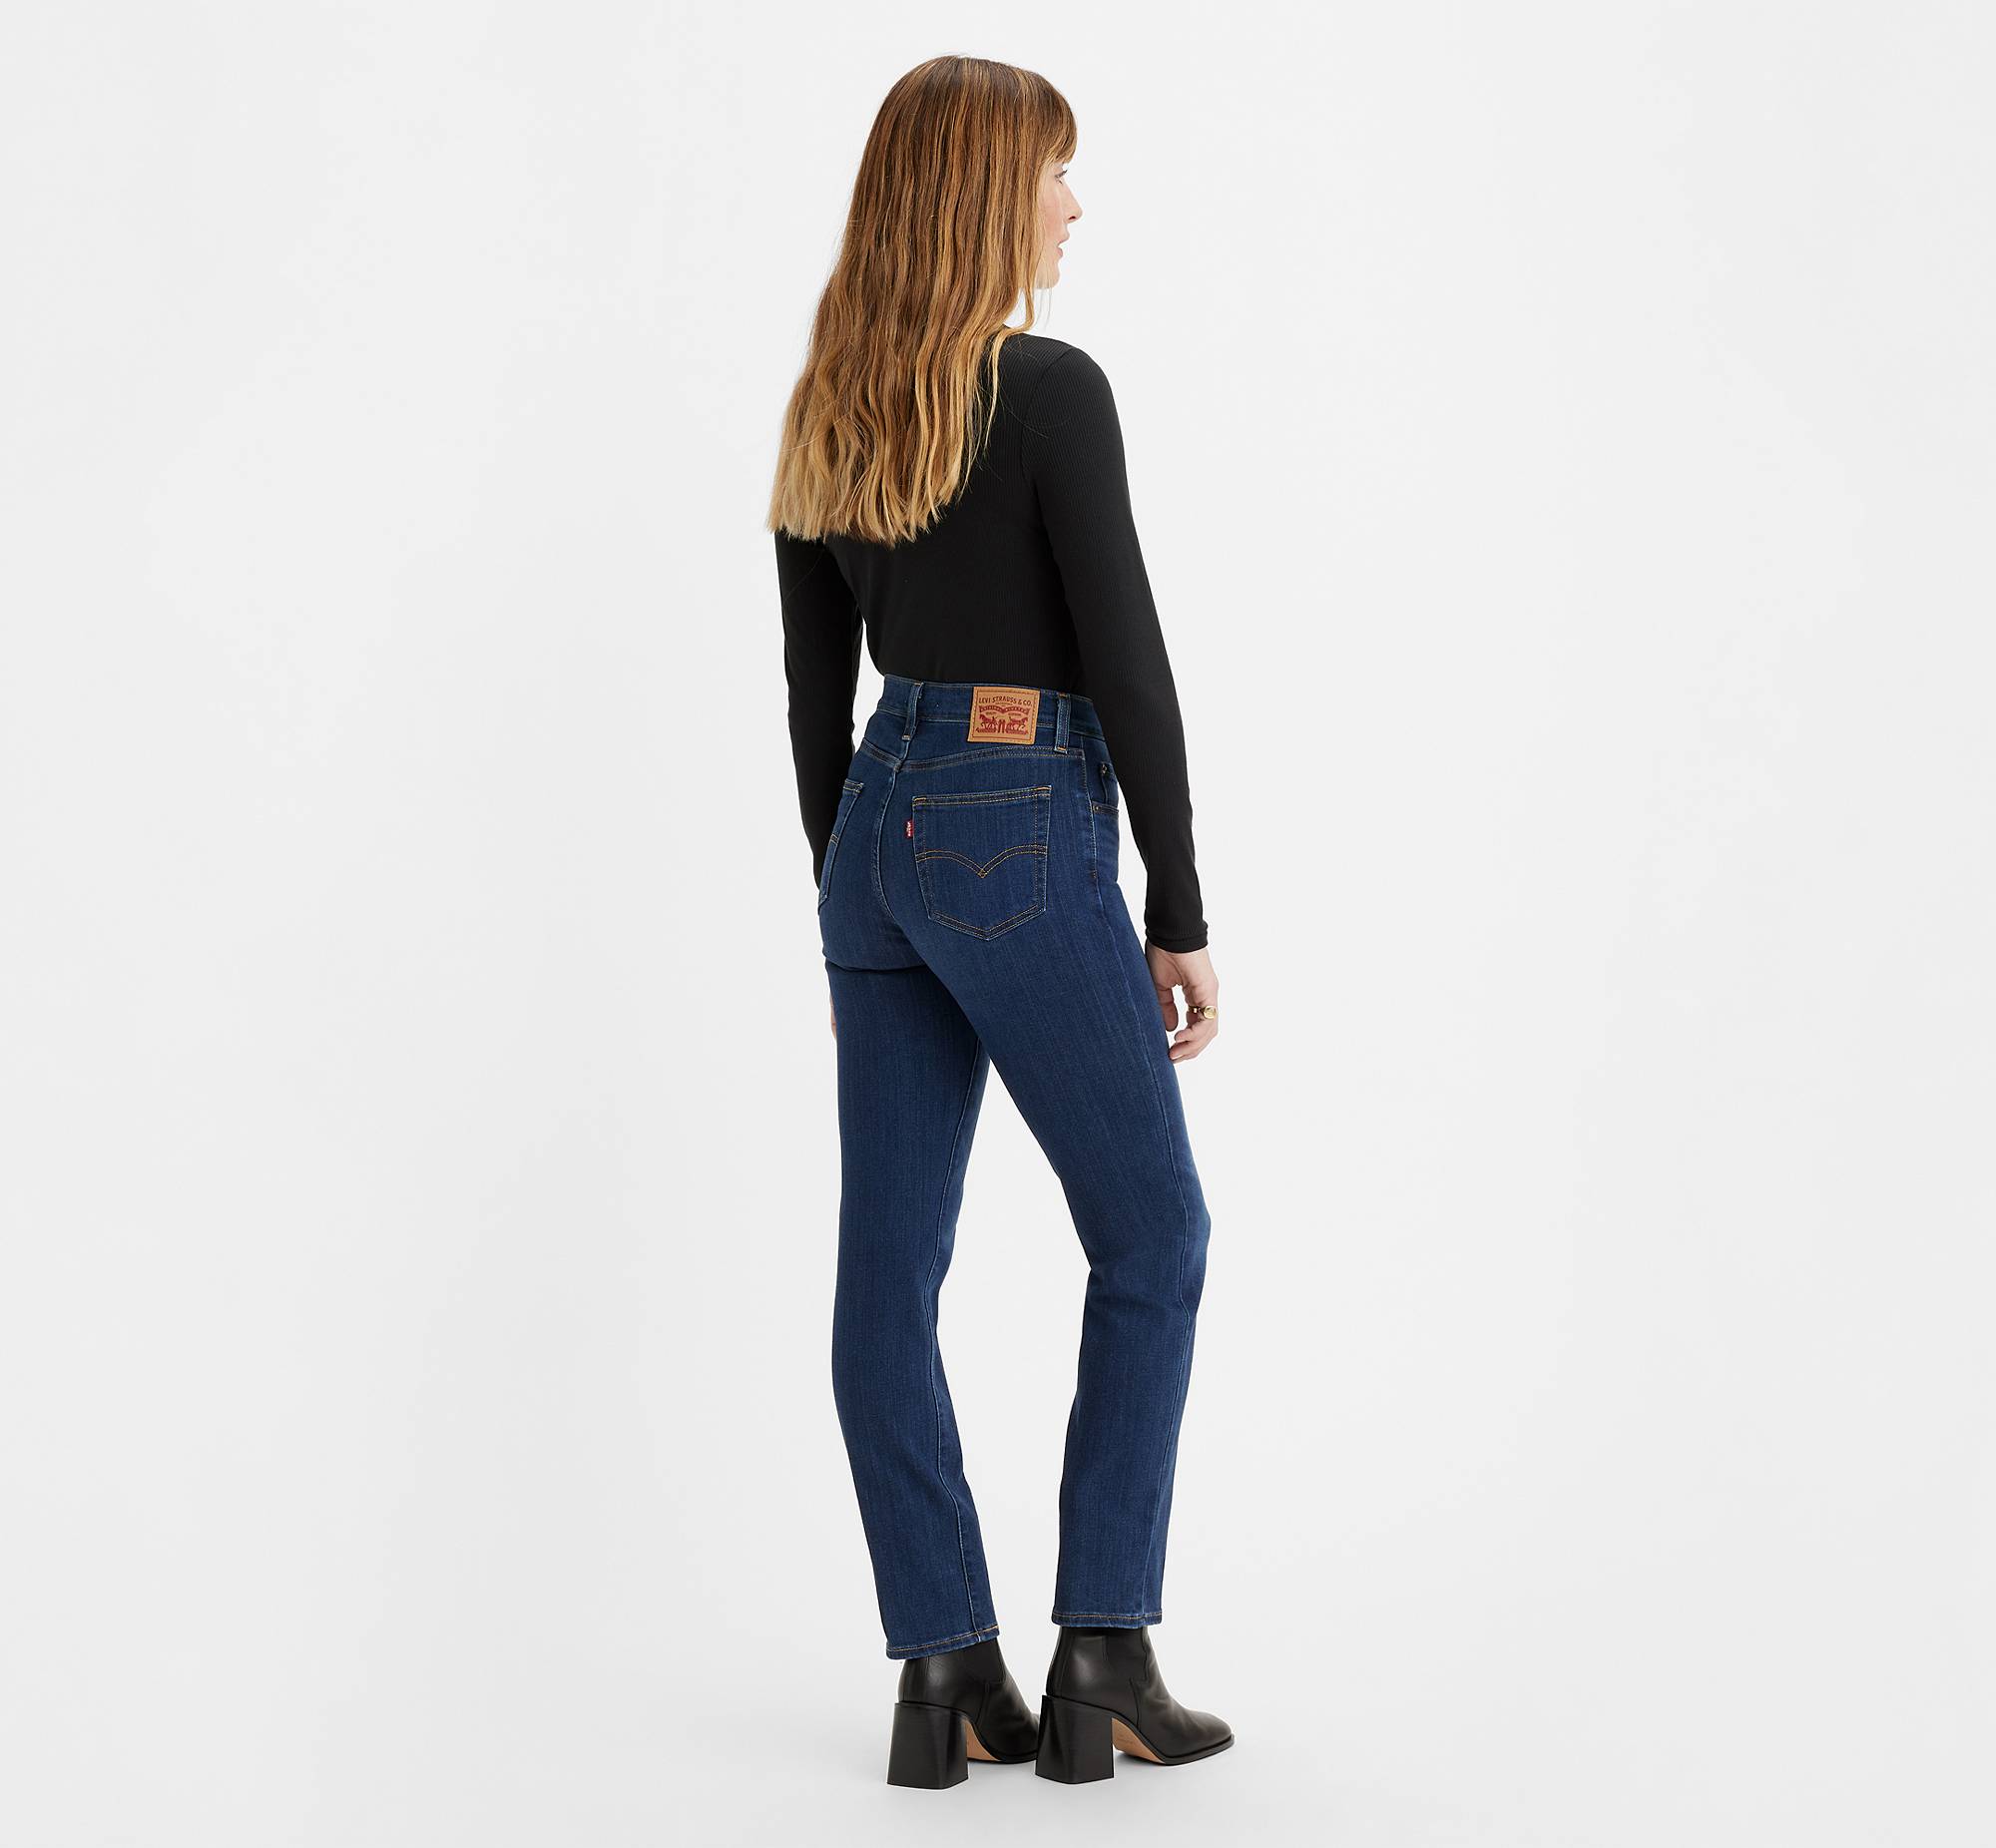 724™ High Rise Straight Jeans - Blue